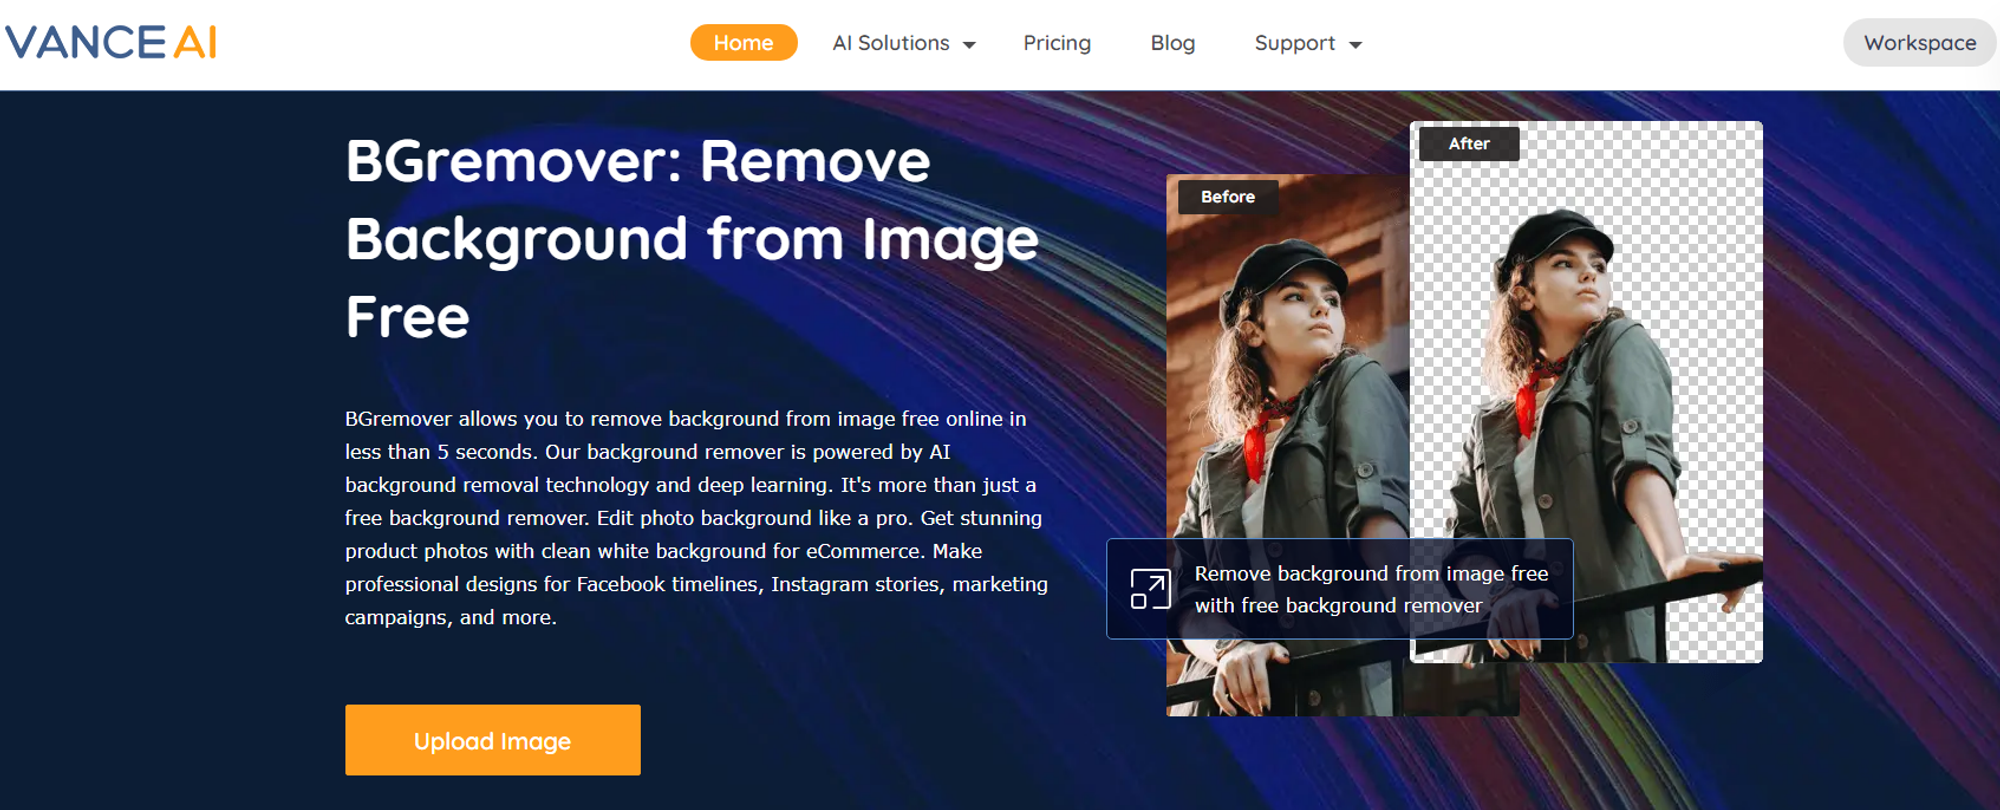 BGremover - AI Background Remover to remove Background from Image Free